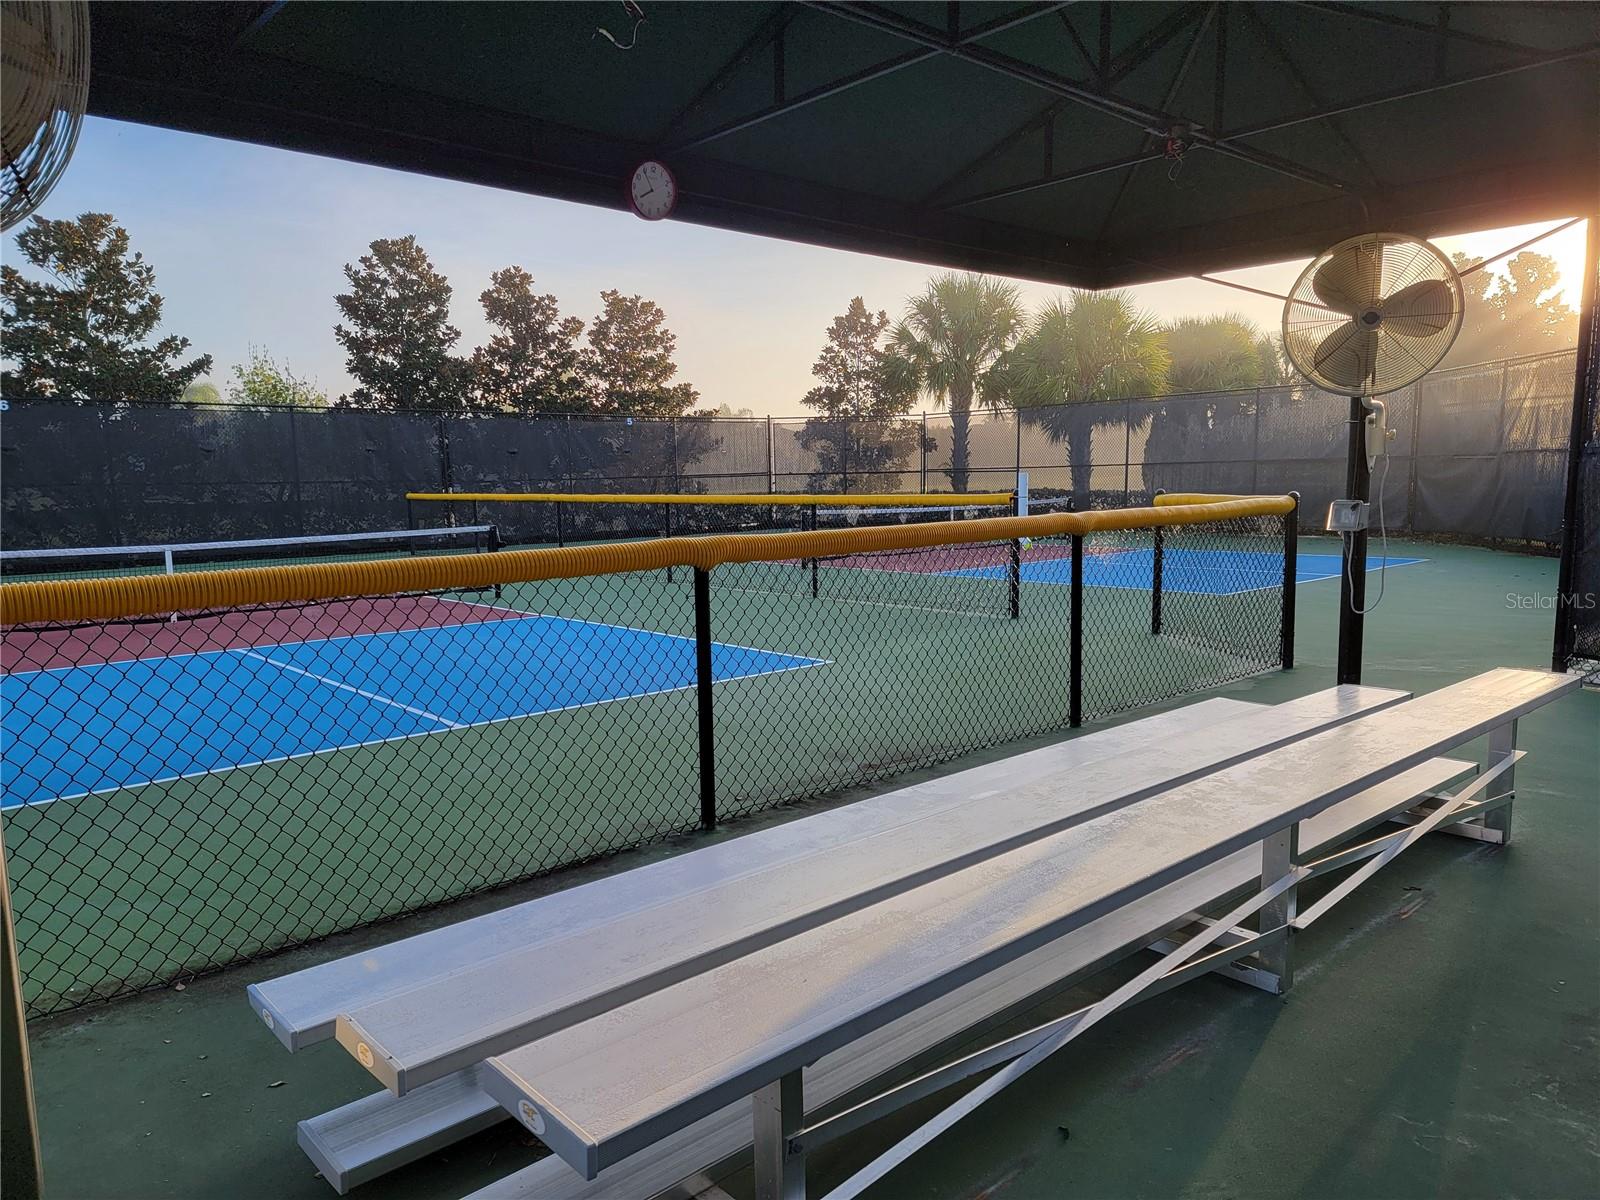 Dedicated Community Pickleball Courts